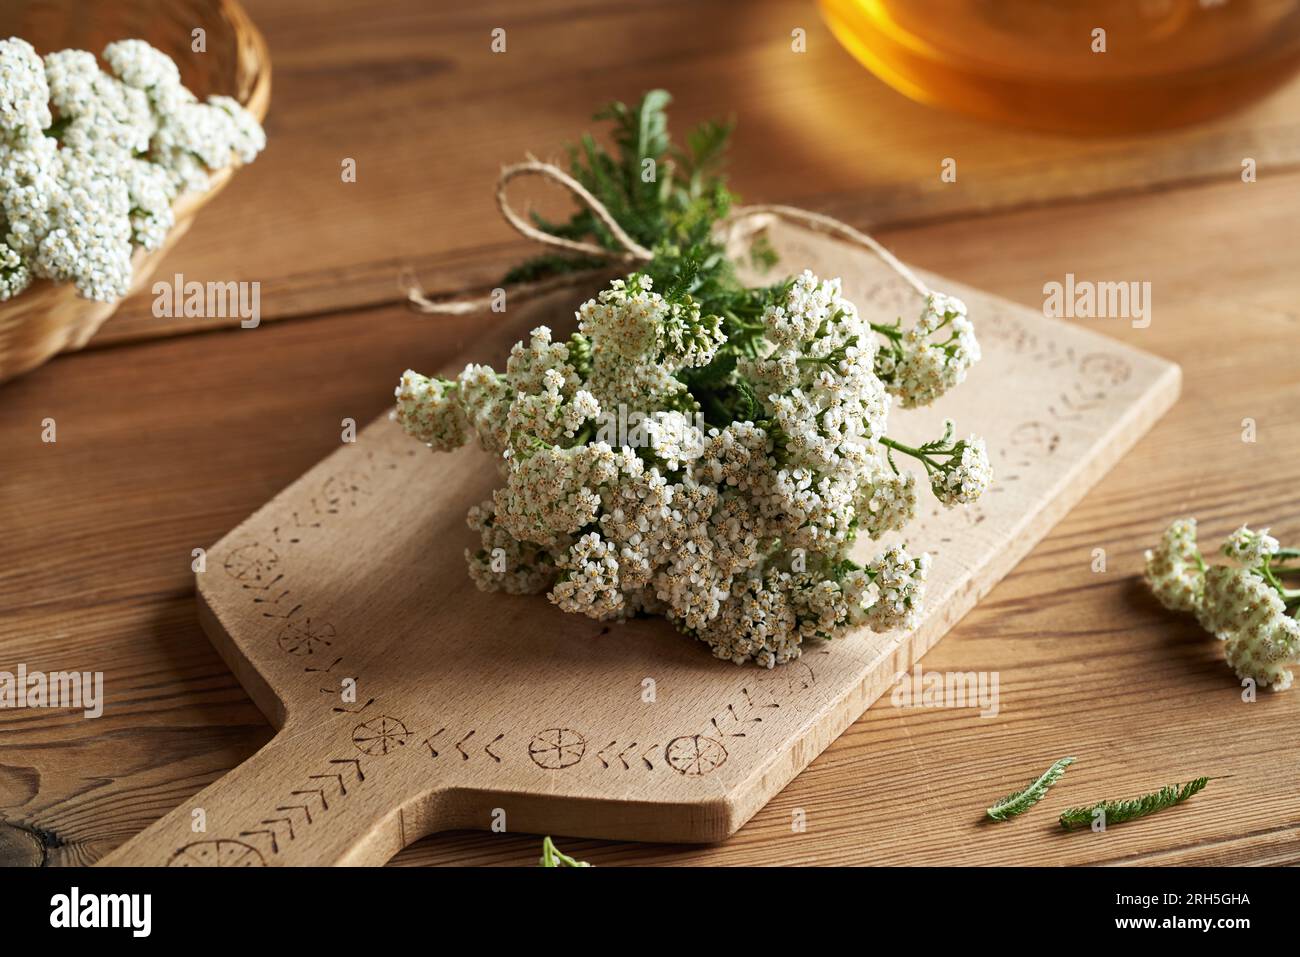 Fresh yarrow flowers on a table, close up Stock Photo